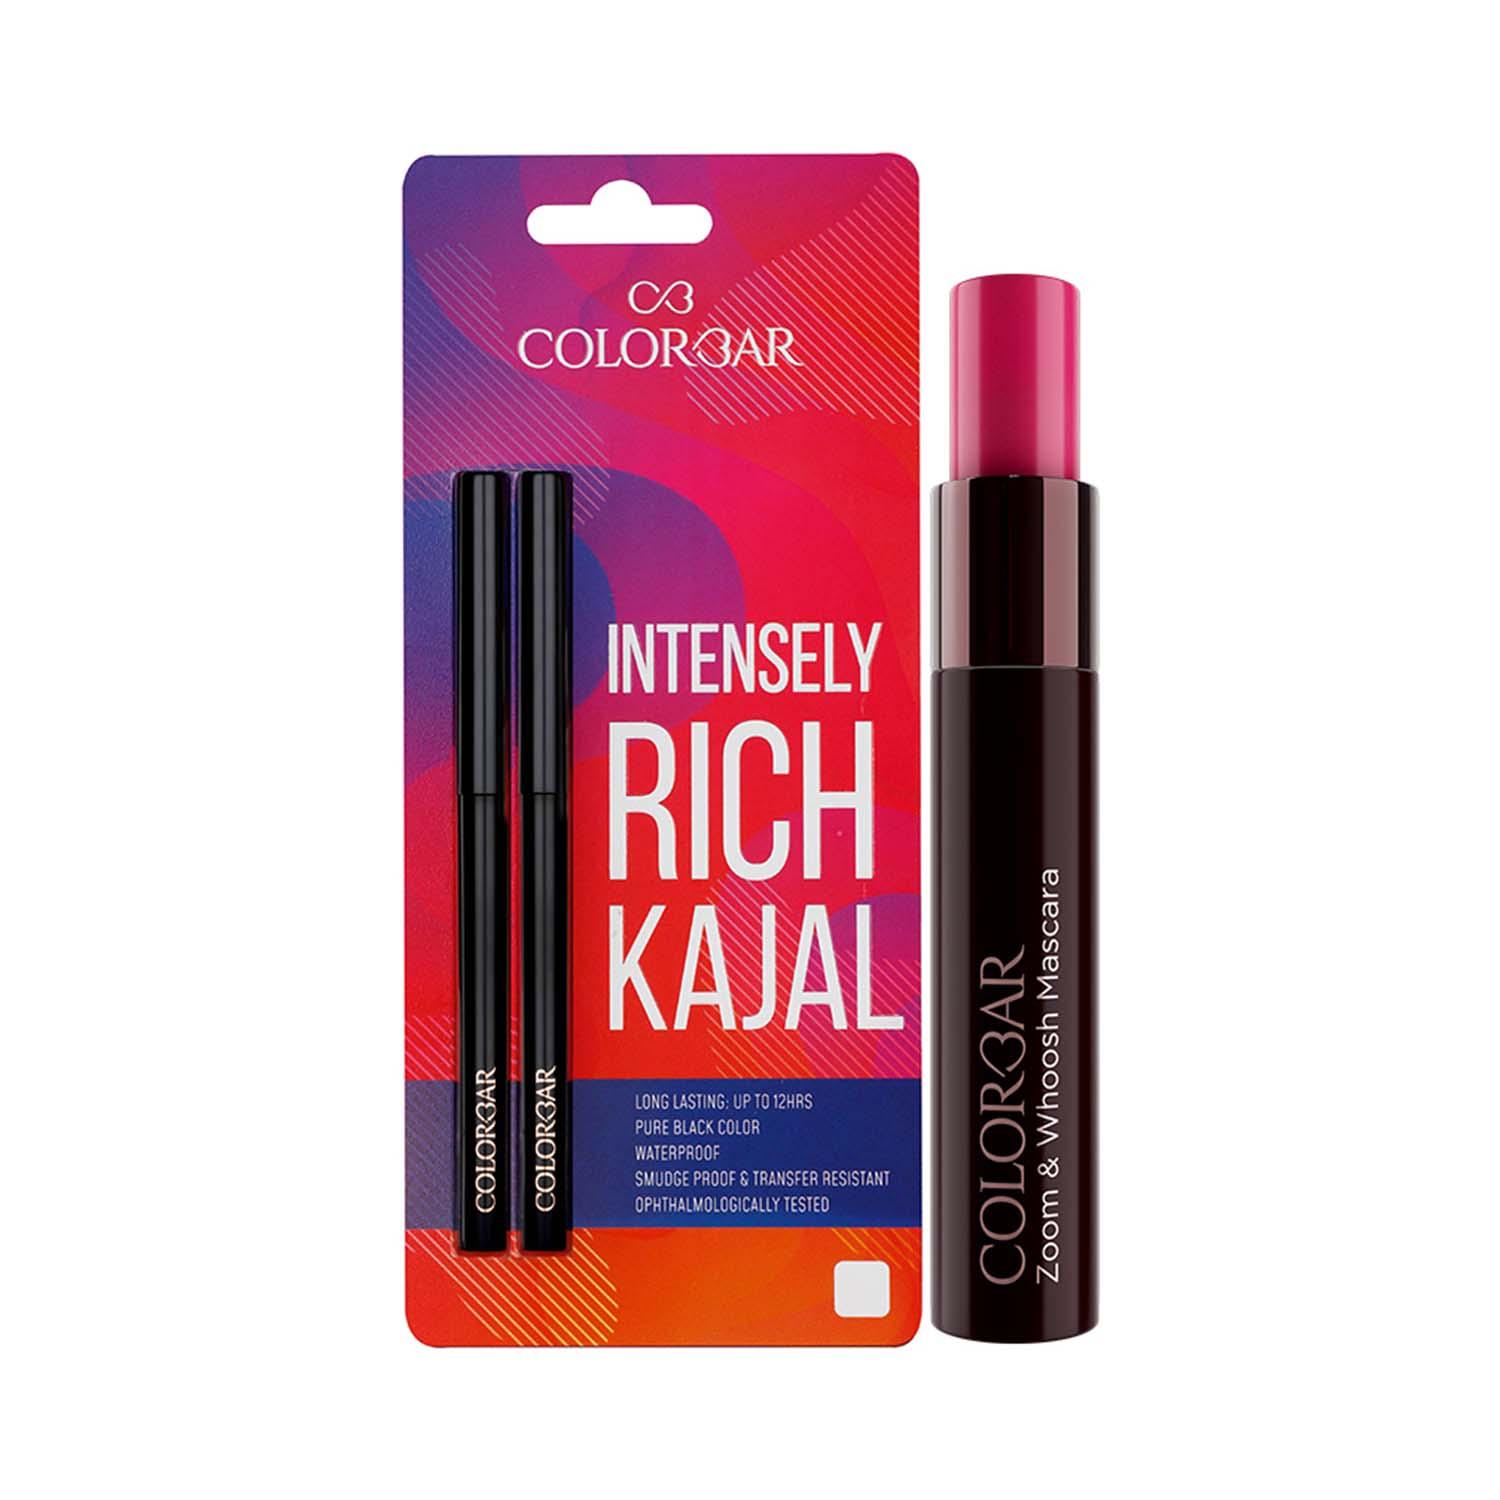 Colorbar Intensely Rich Kajal + Zoom & Whoosh Mascara Combo